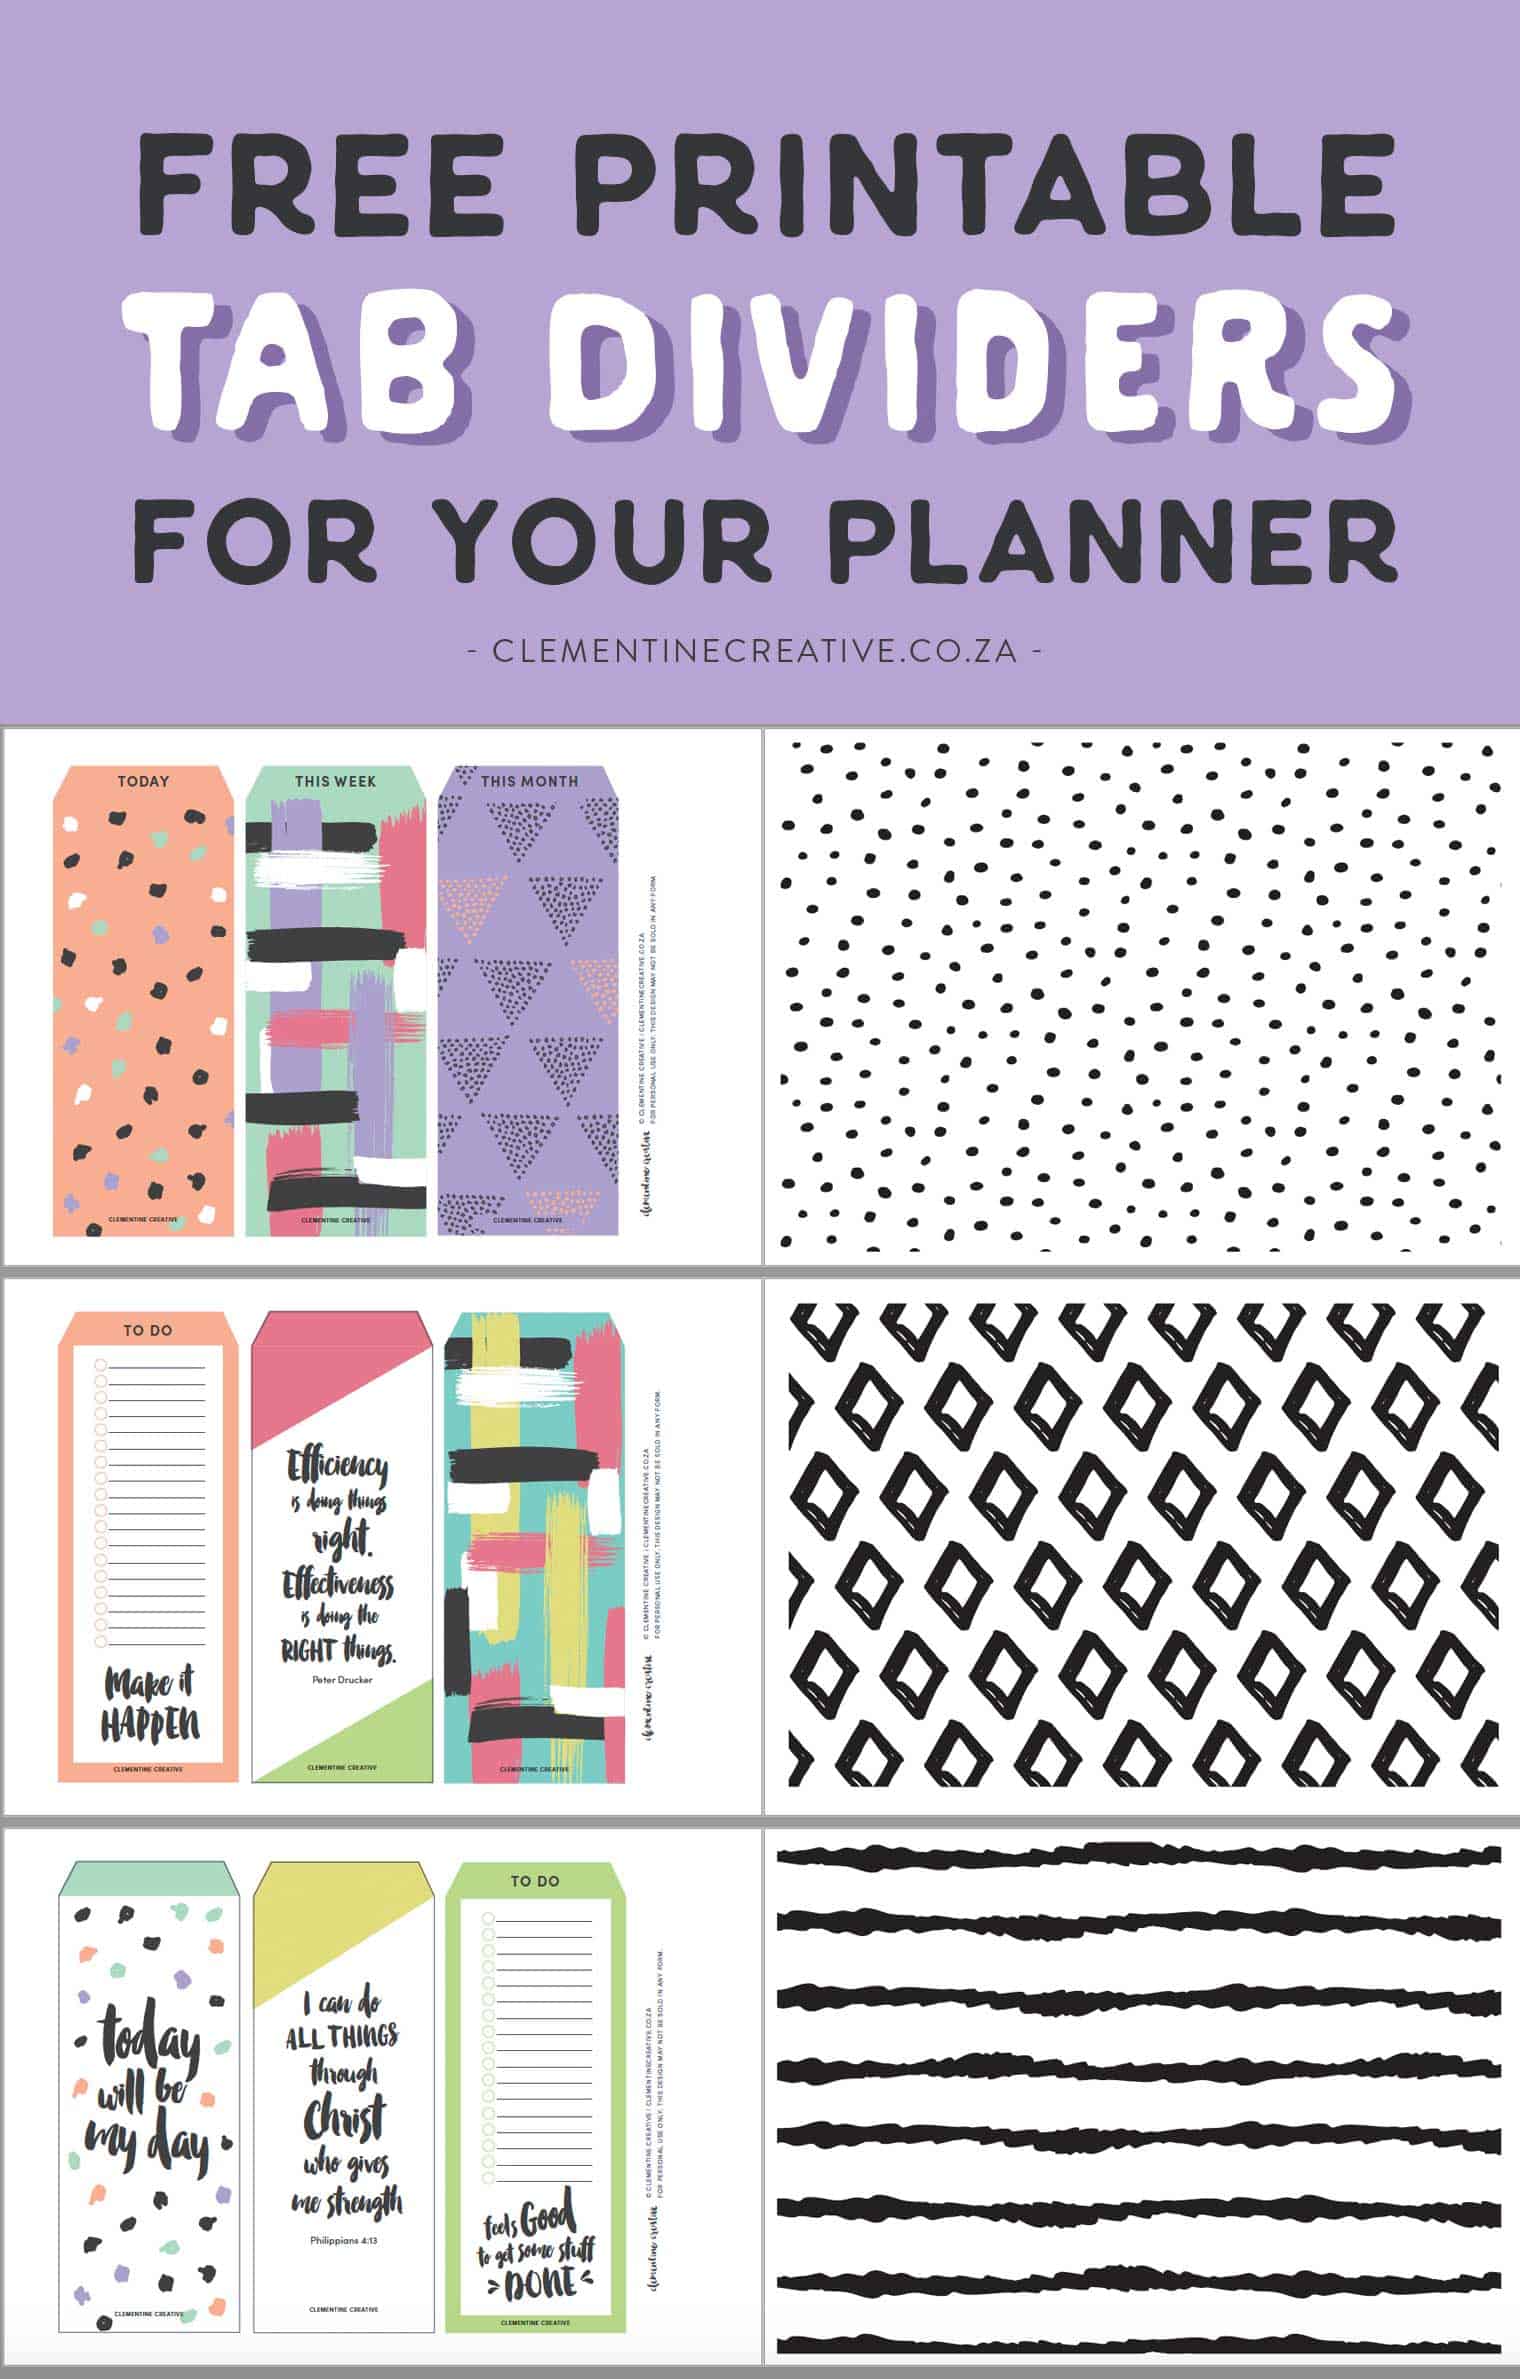 Free Printable Top Tab Dividers for Planners, Diaries and Agendas